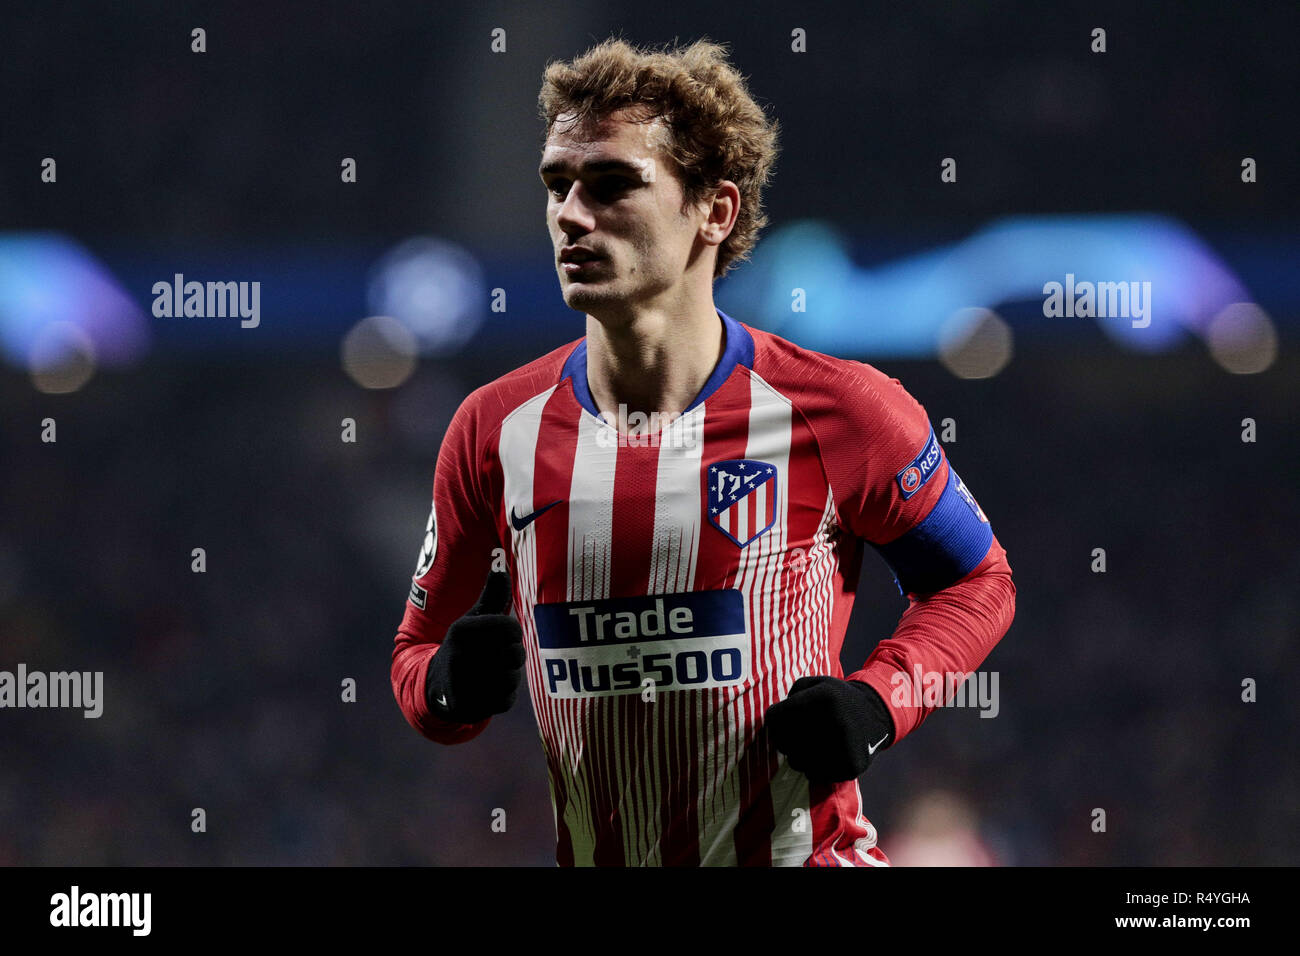 Madrid, Madrid, Spain. 28th Nov, 2018. Atletico de Madrid's Antoine Griezmann seen in action during the UEFA Champions League match between Atletico de Madrid and AS Monaco at the Wanda Metropolitano Stadium in Madrid. Credit: Legan P. Mace/SOPA Images/ZUMA Wire/Alamy Live News Stock Photo